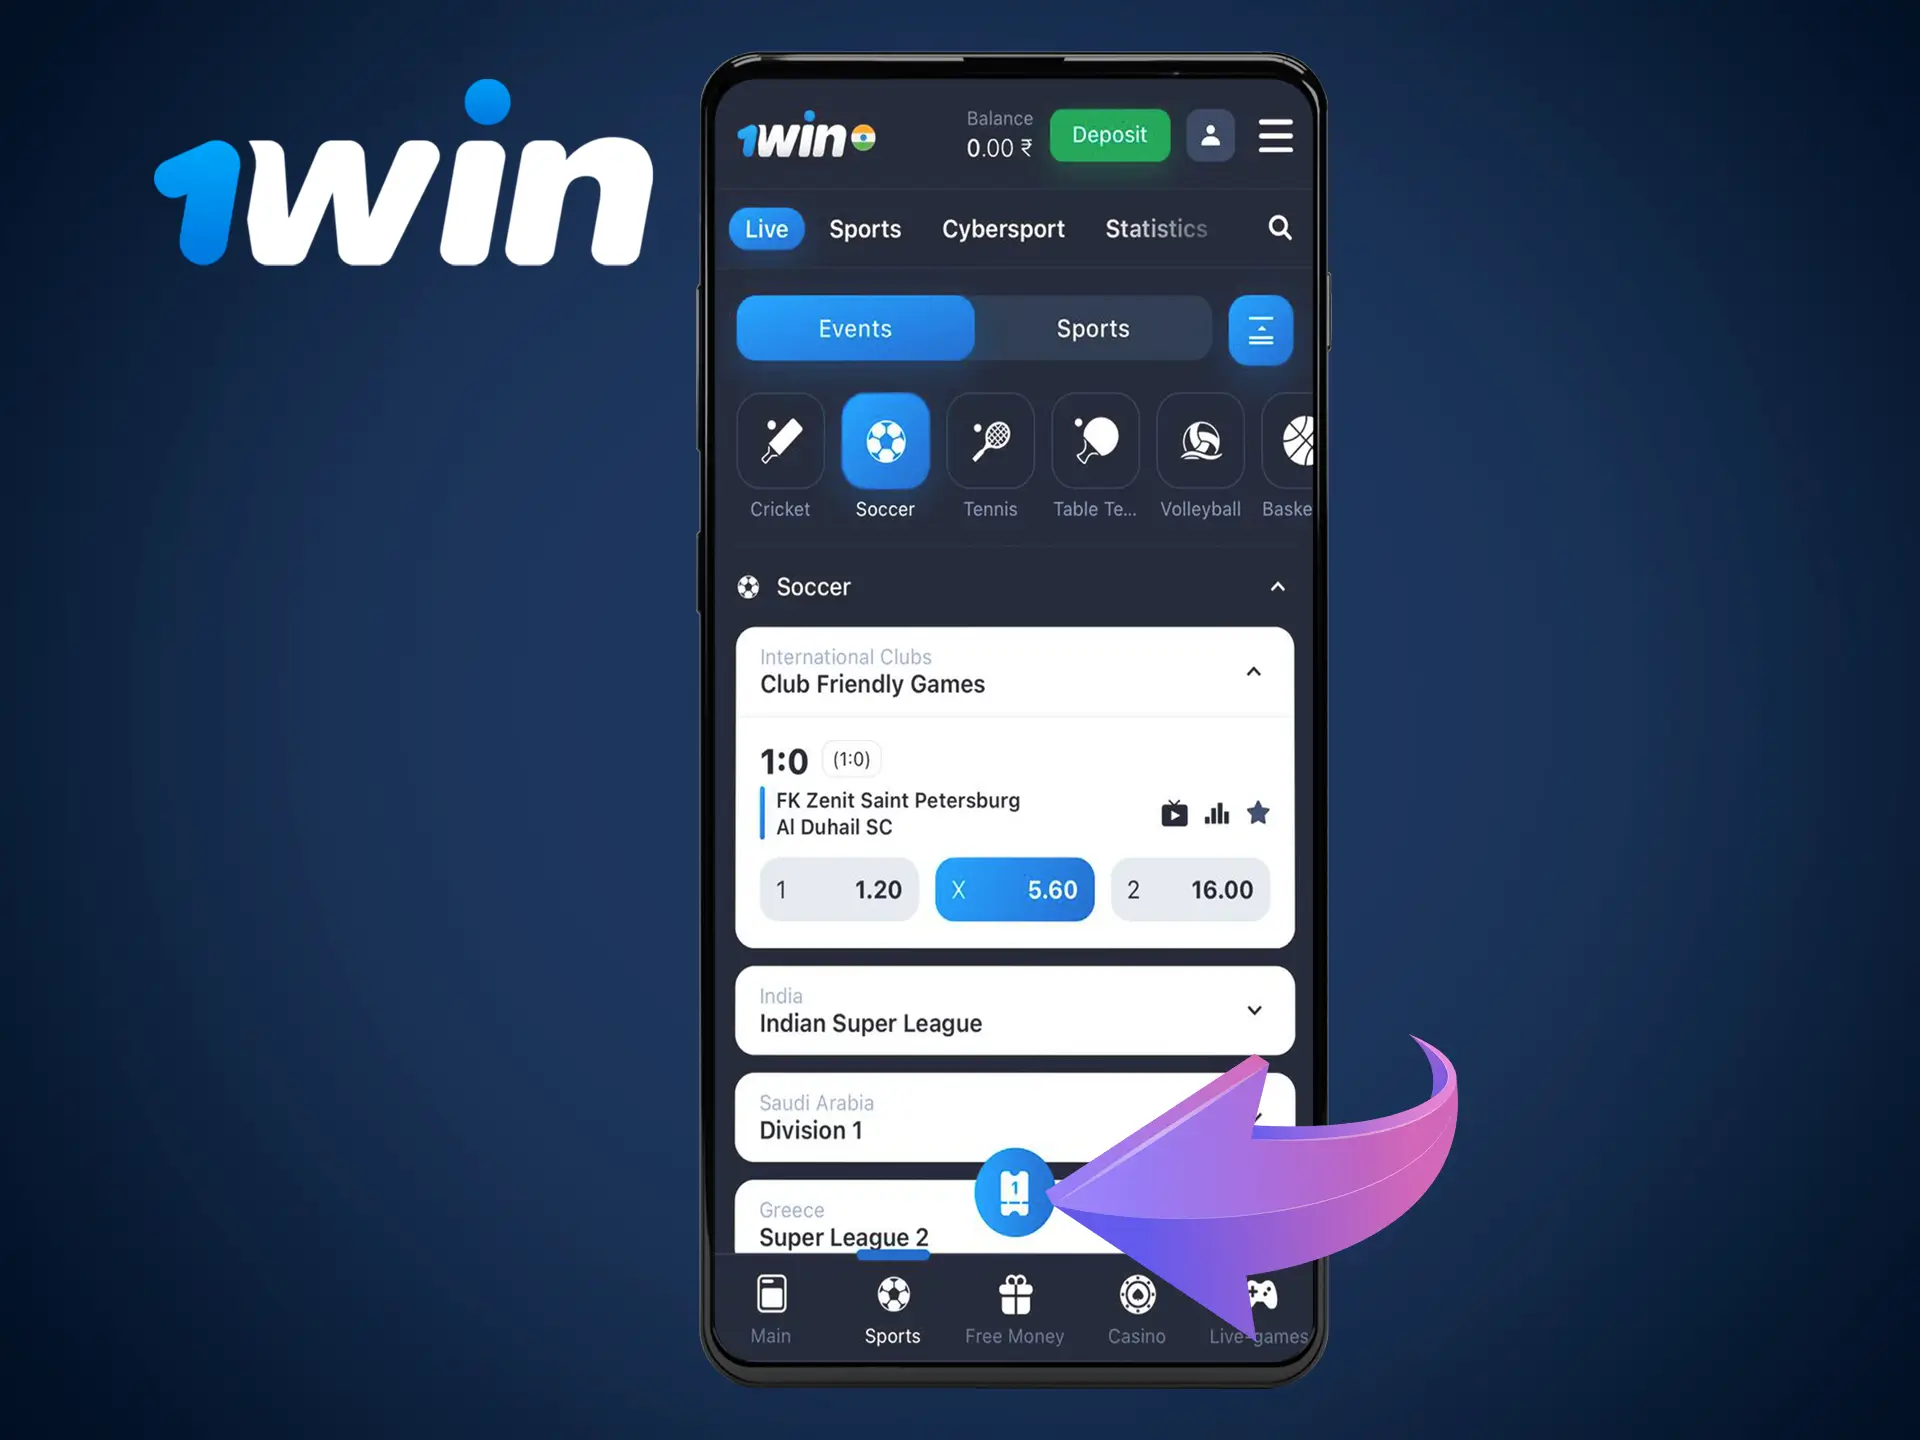 Start your exciting and thrilling journey in the world of betting with 1Win.